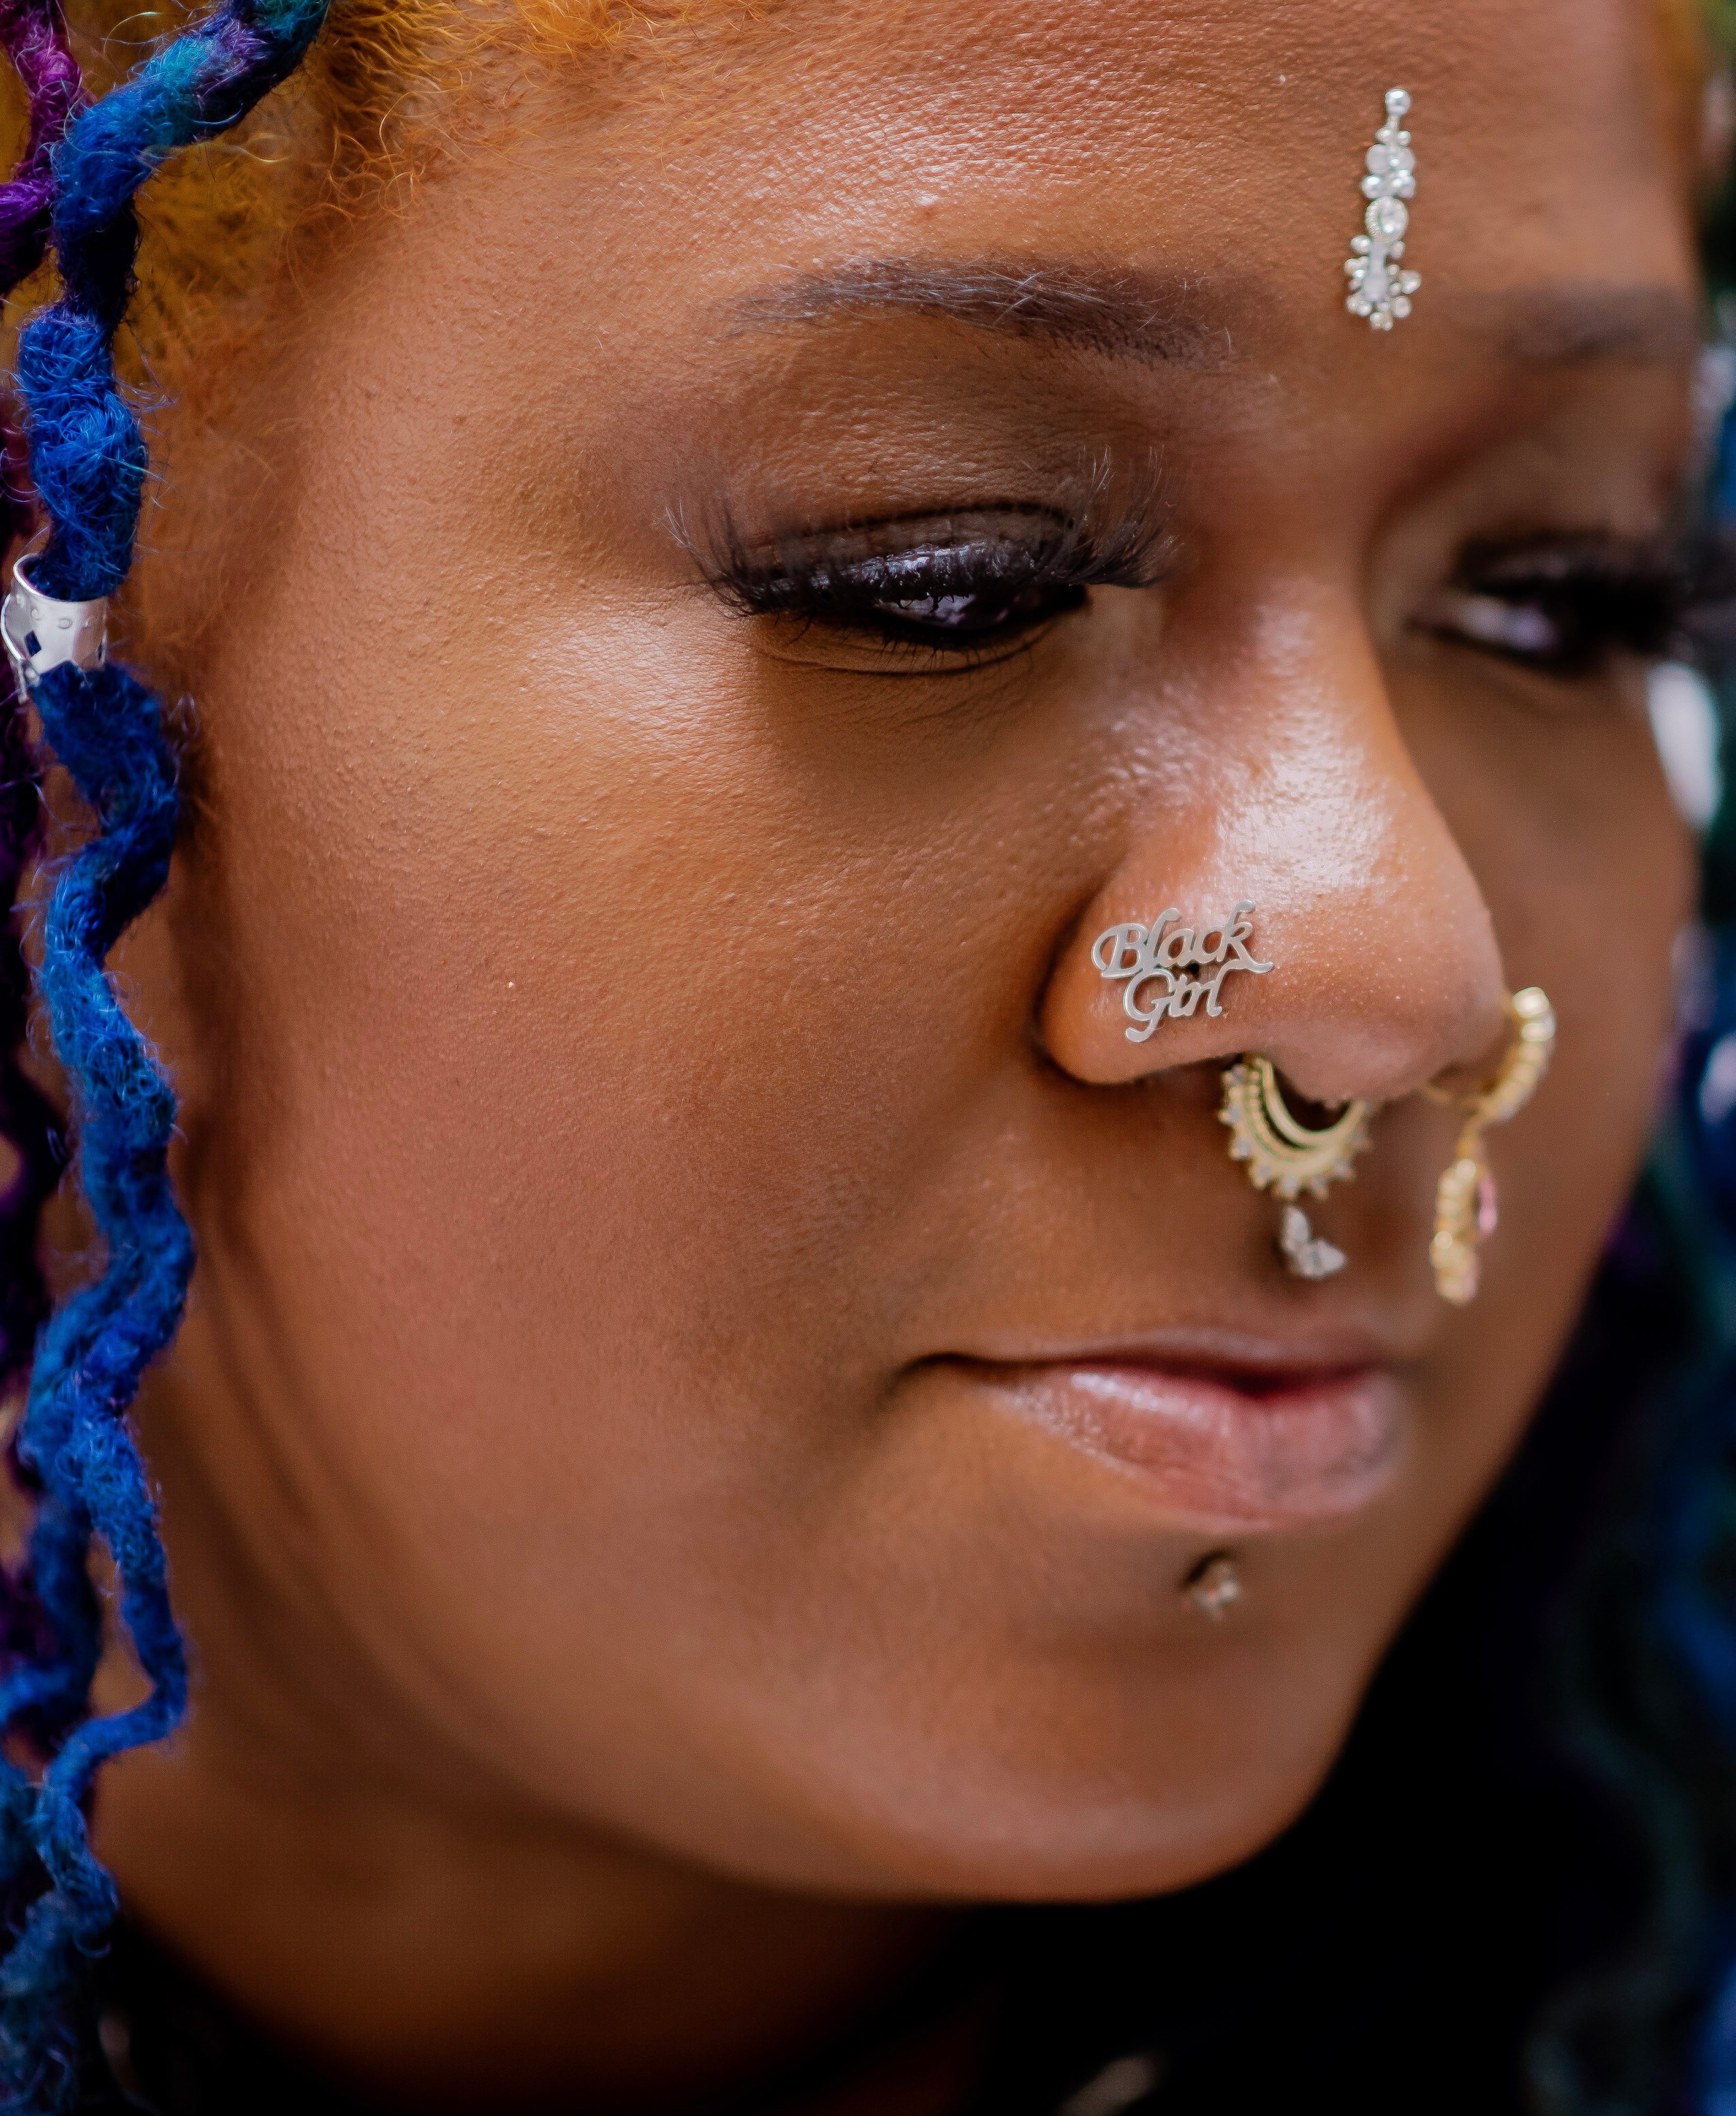 What Does Your Nose Piercing Say About You?